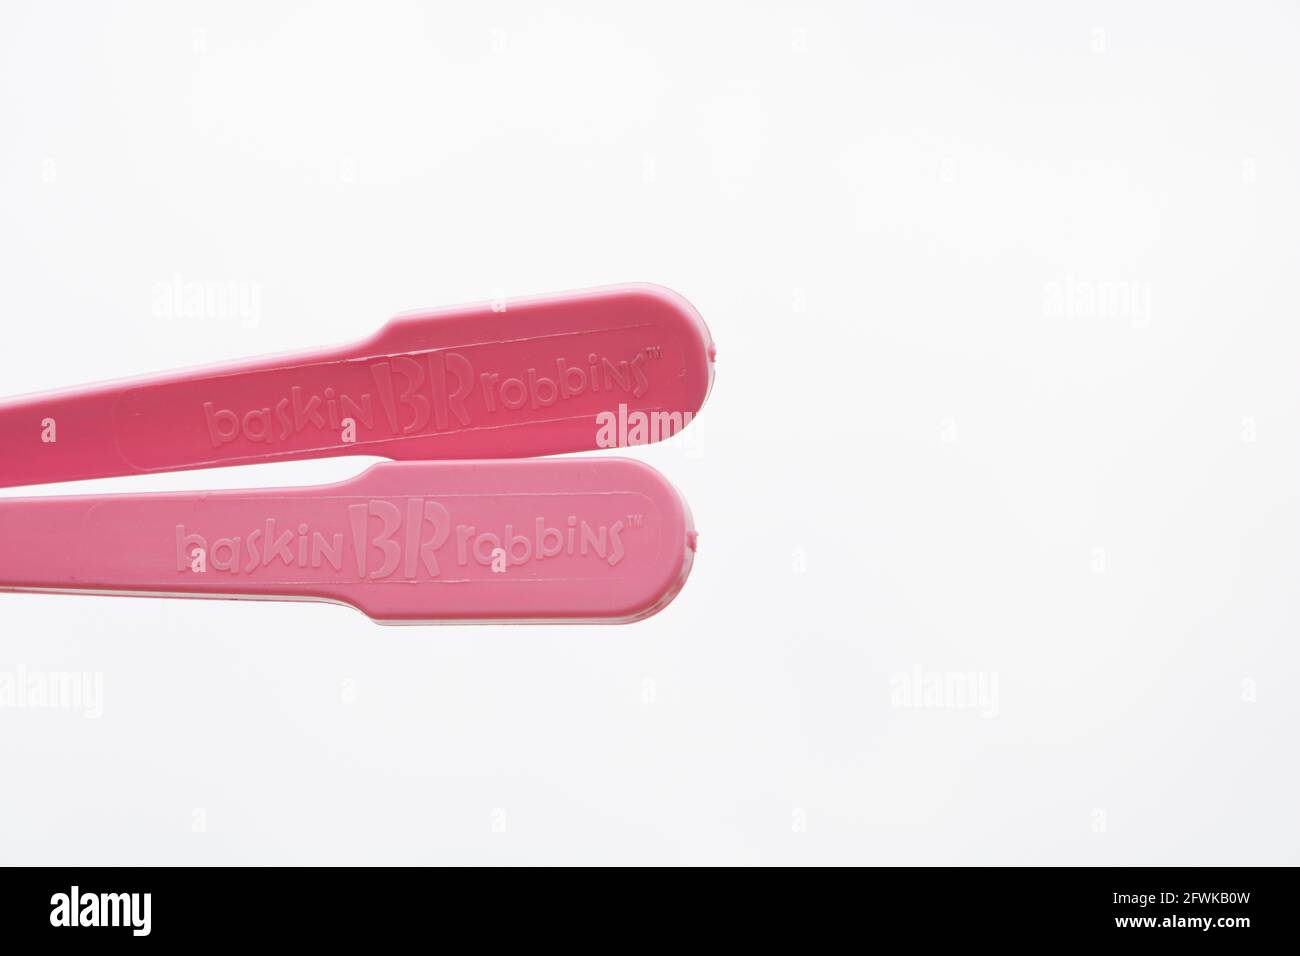 Plastic utensils, Pink plastic spoon on isolated white background Stock Photo